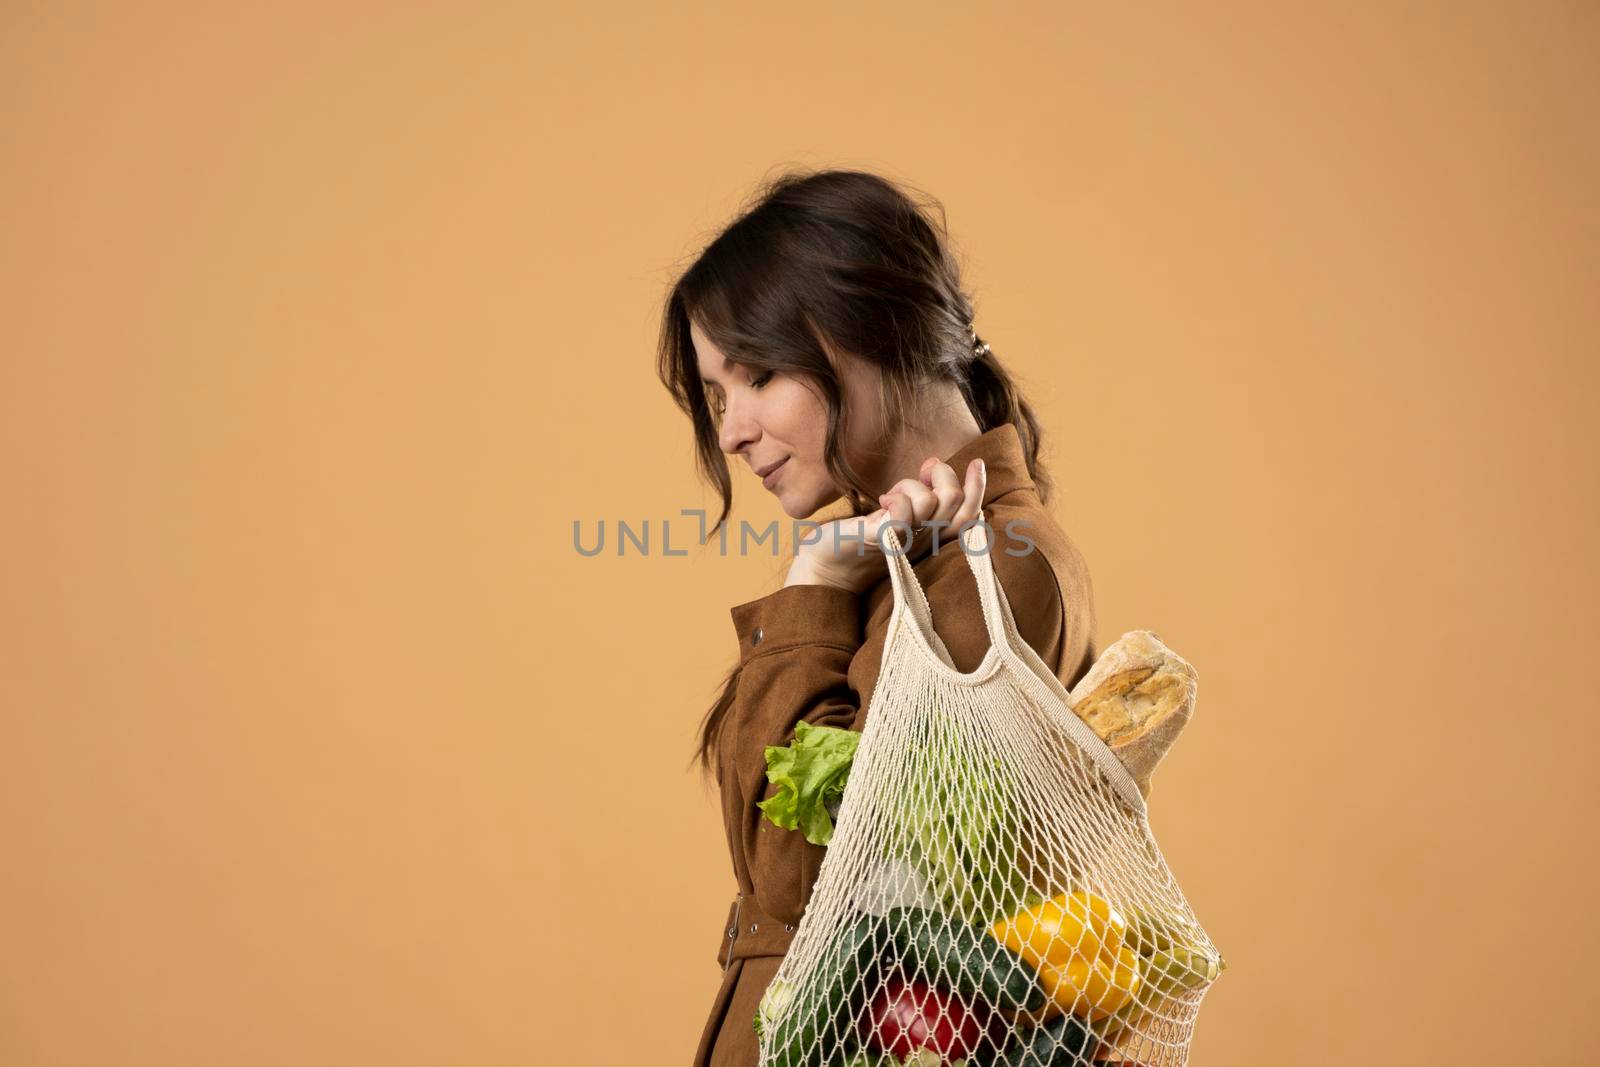 Zero waste concept. Young woman holding reusable cotton shopping mesh bag with groceries from a market. Concept of no plastic. Zero waste, plastic free. Eco friendly concept. Sustainable lifestyle. by vovsht